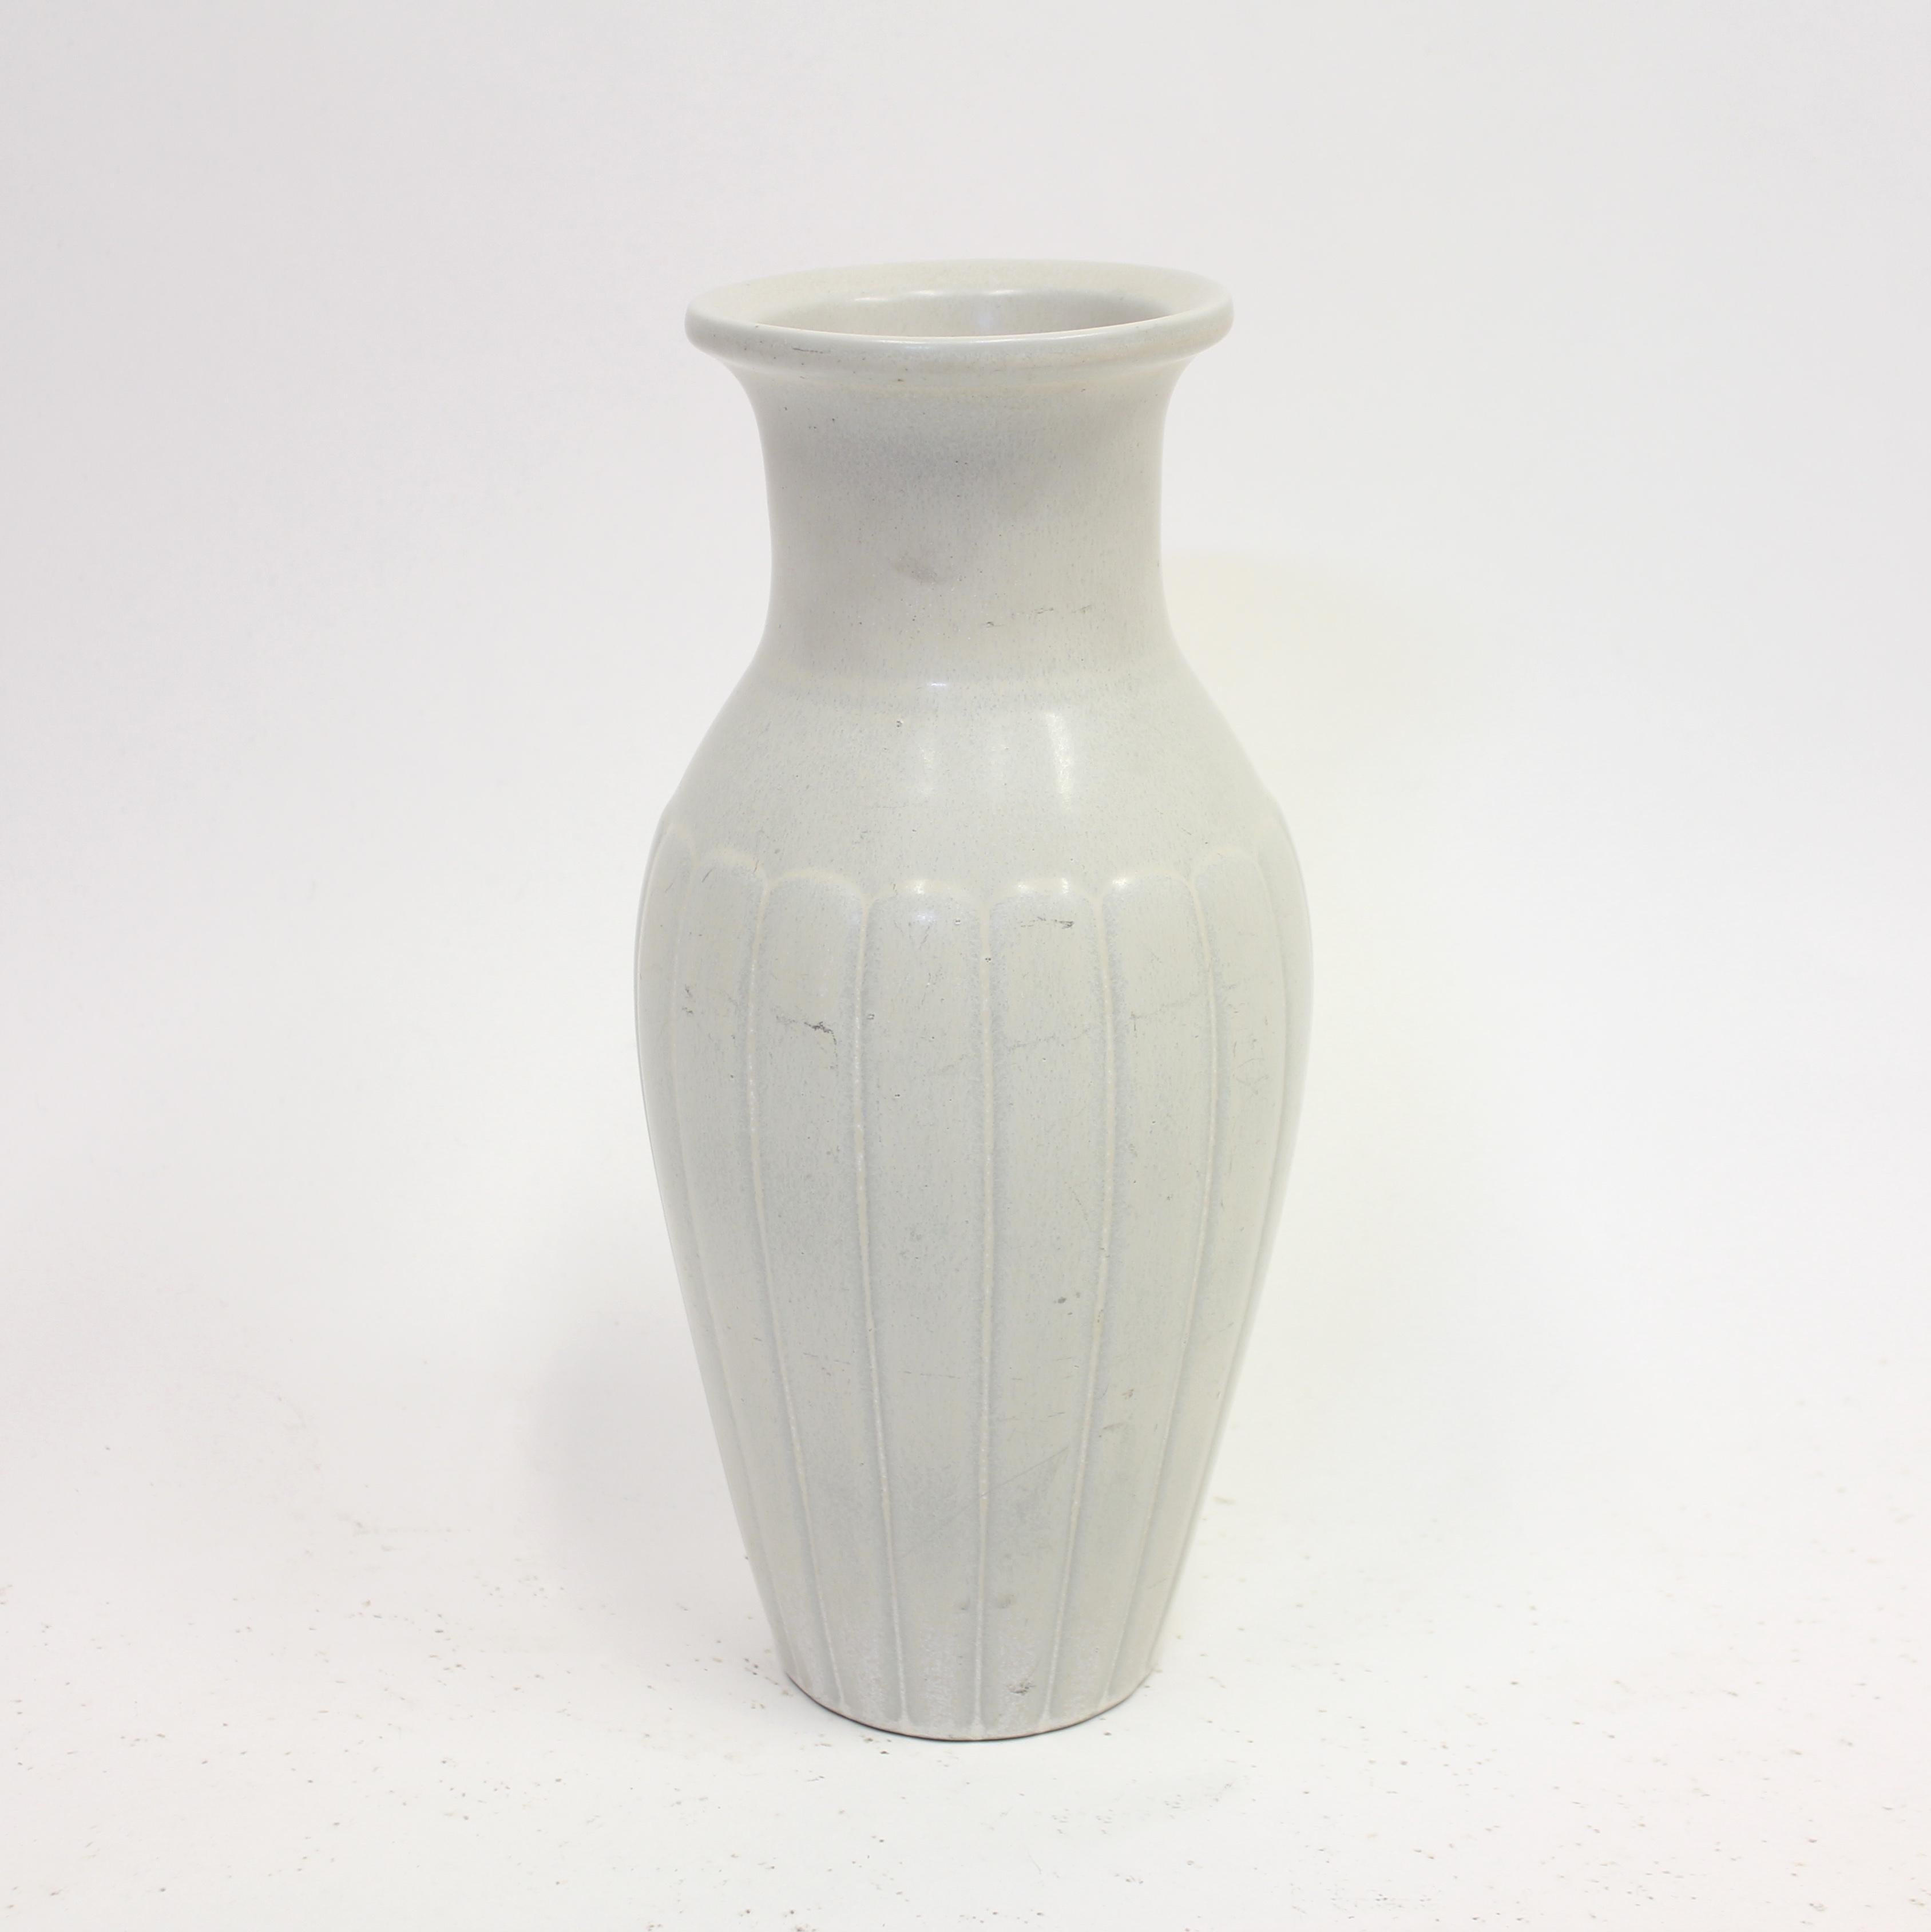 Large white stoneware vase by Swedish ceramicist Gunnar Nylund, produced by Rörstrand in the 1950s. Nice shape with a striped pattern on the lower and wider section. The vase is in an overall good vintage condition with normal ware consistent with